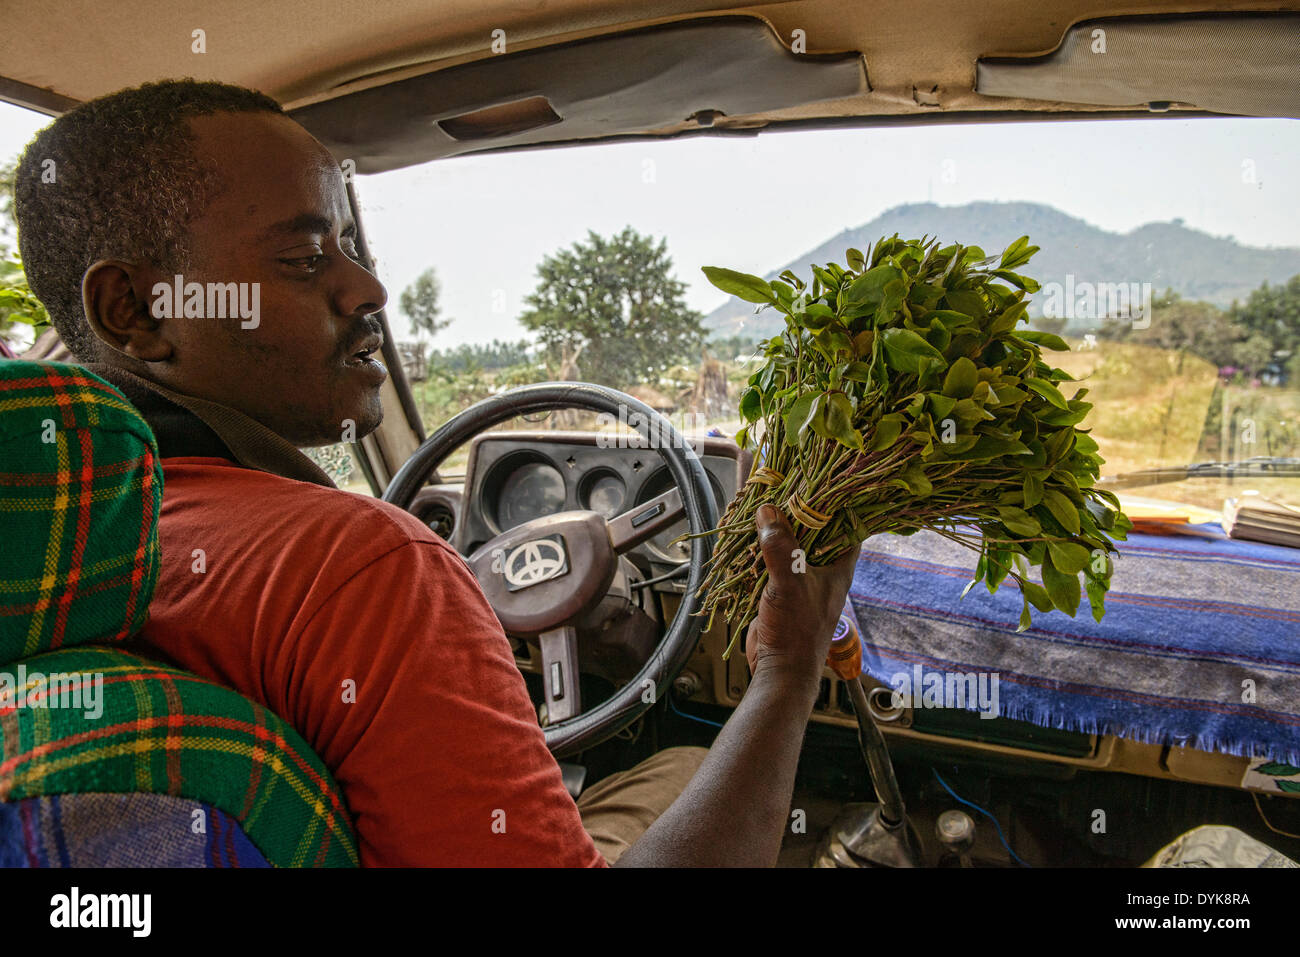 chewing qat (khat), a stimulant plant that is popular in Yemen and Ethiopia Stock Photo